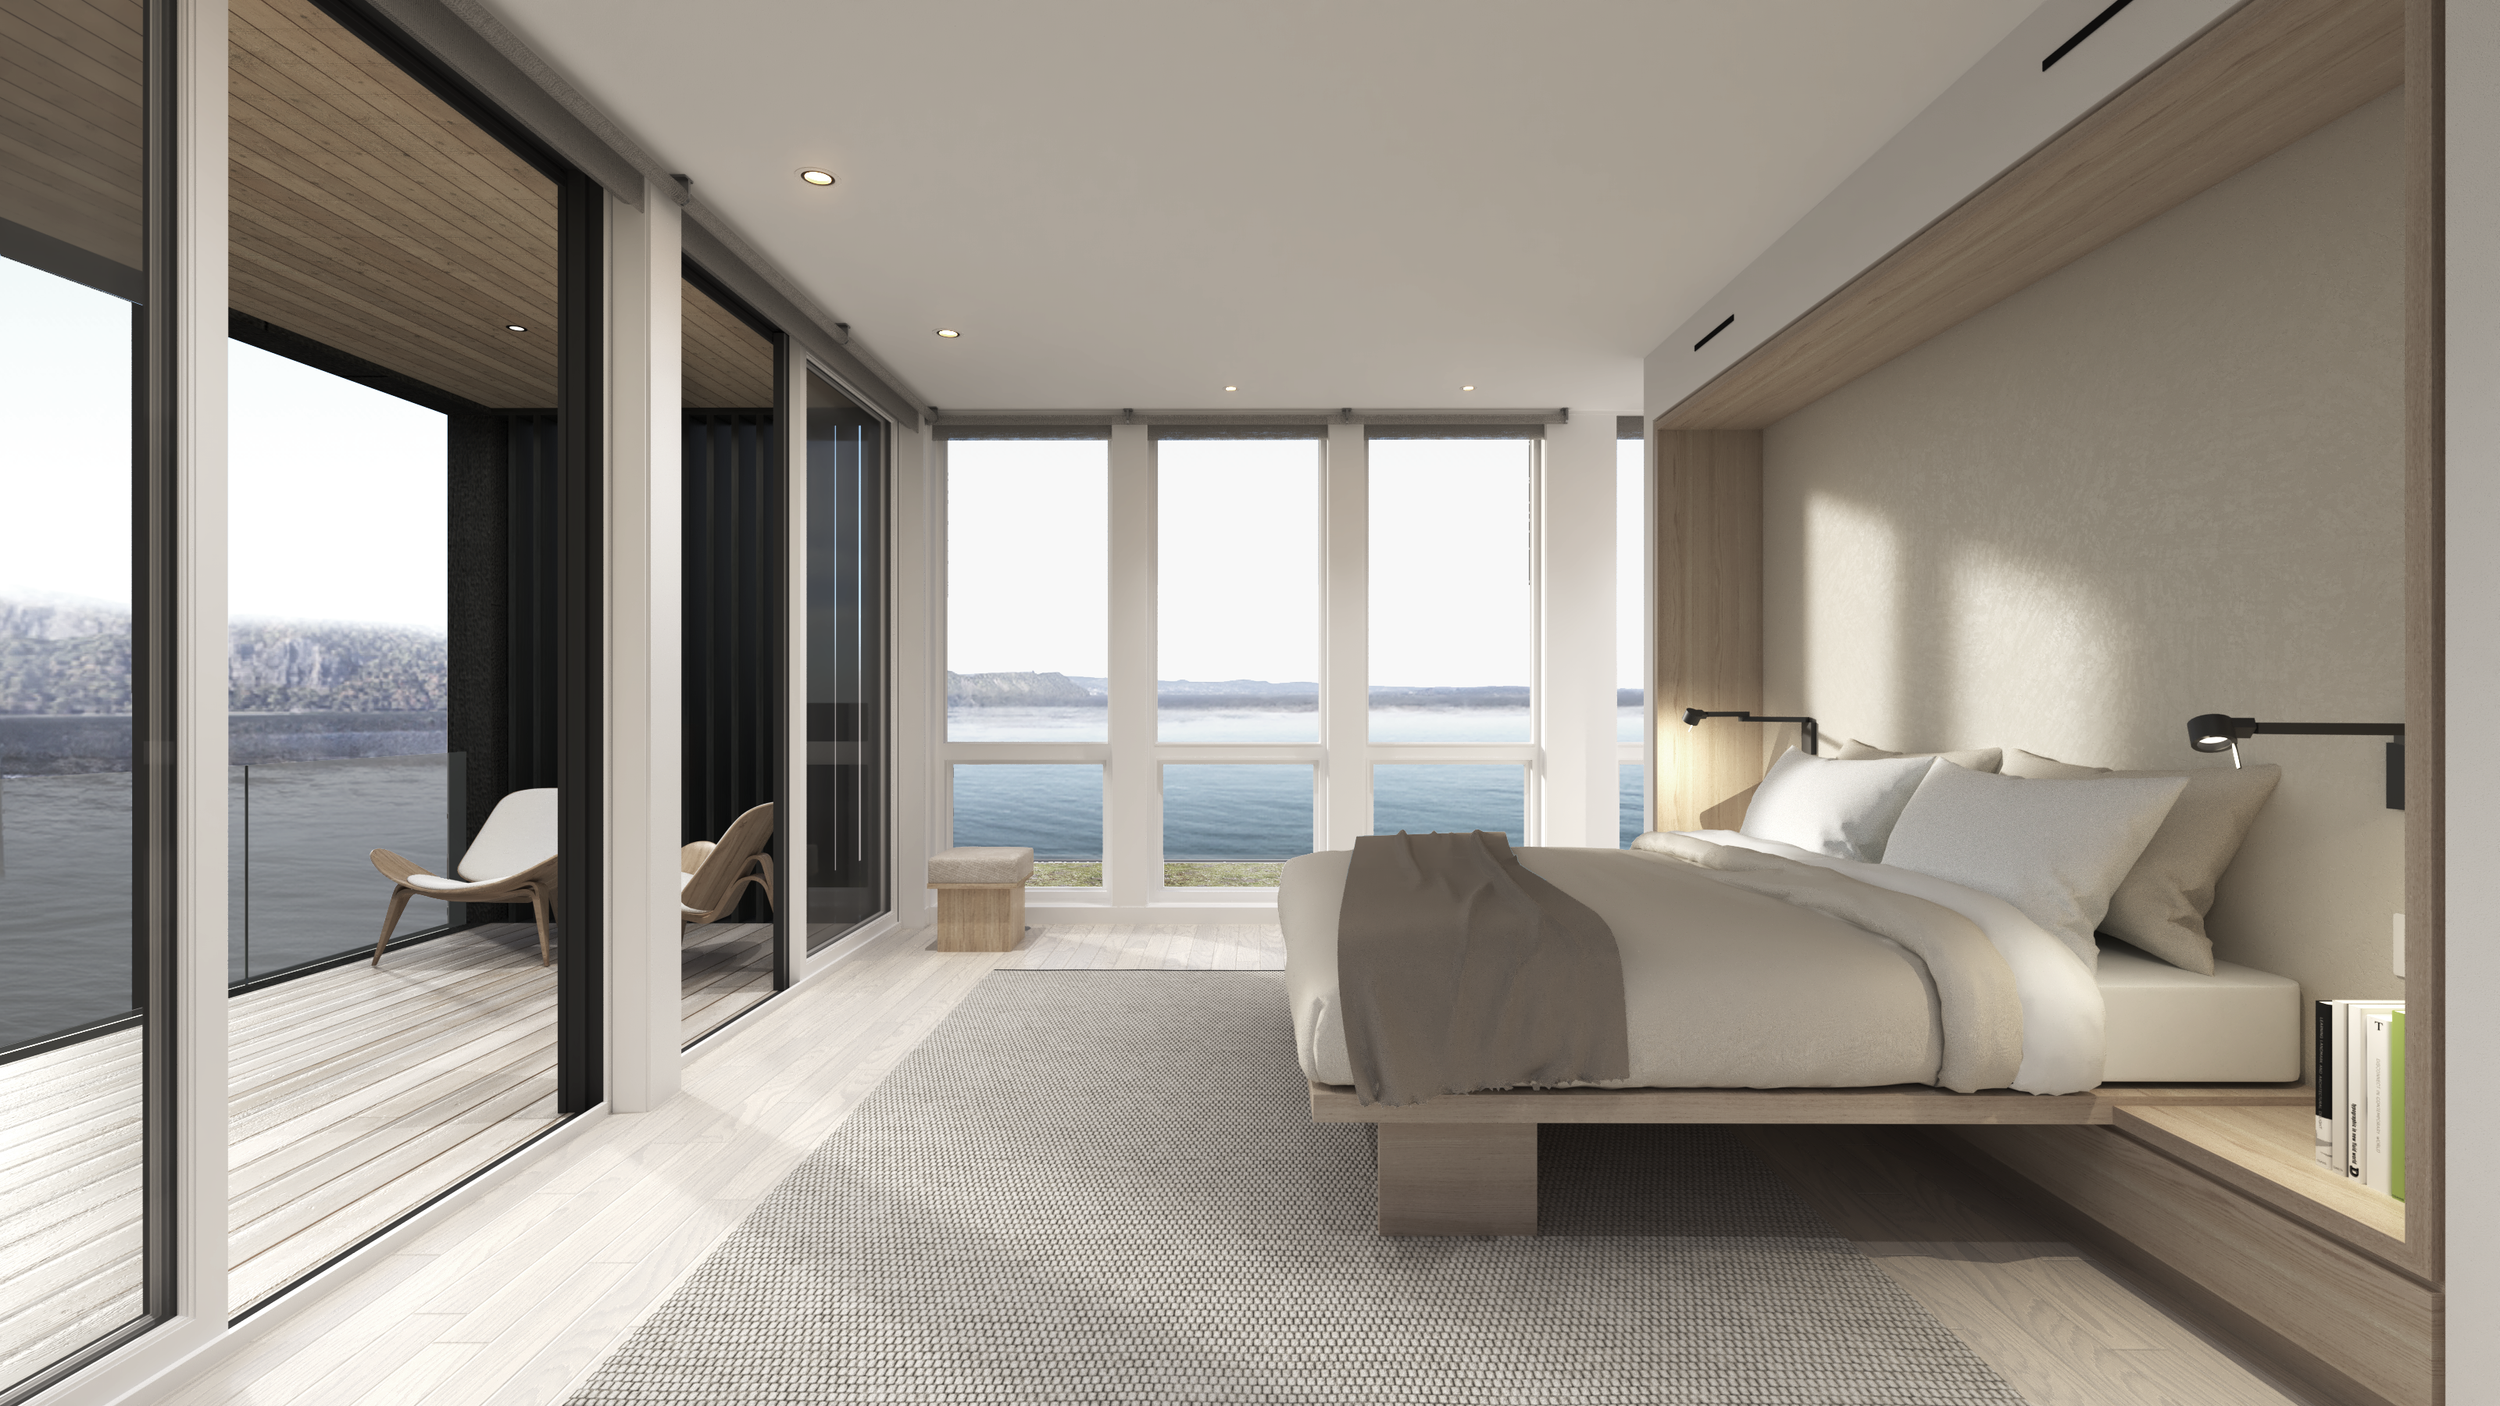 05-re4a-resolution-4-architecture-modern-modular-prefab-briarcliff-manor-residence-bedroom.png